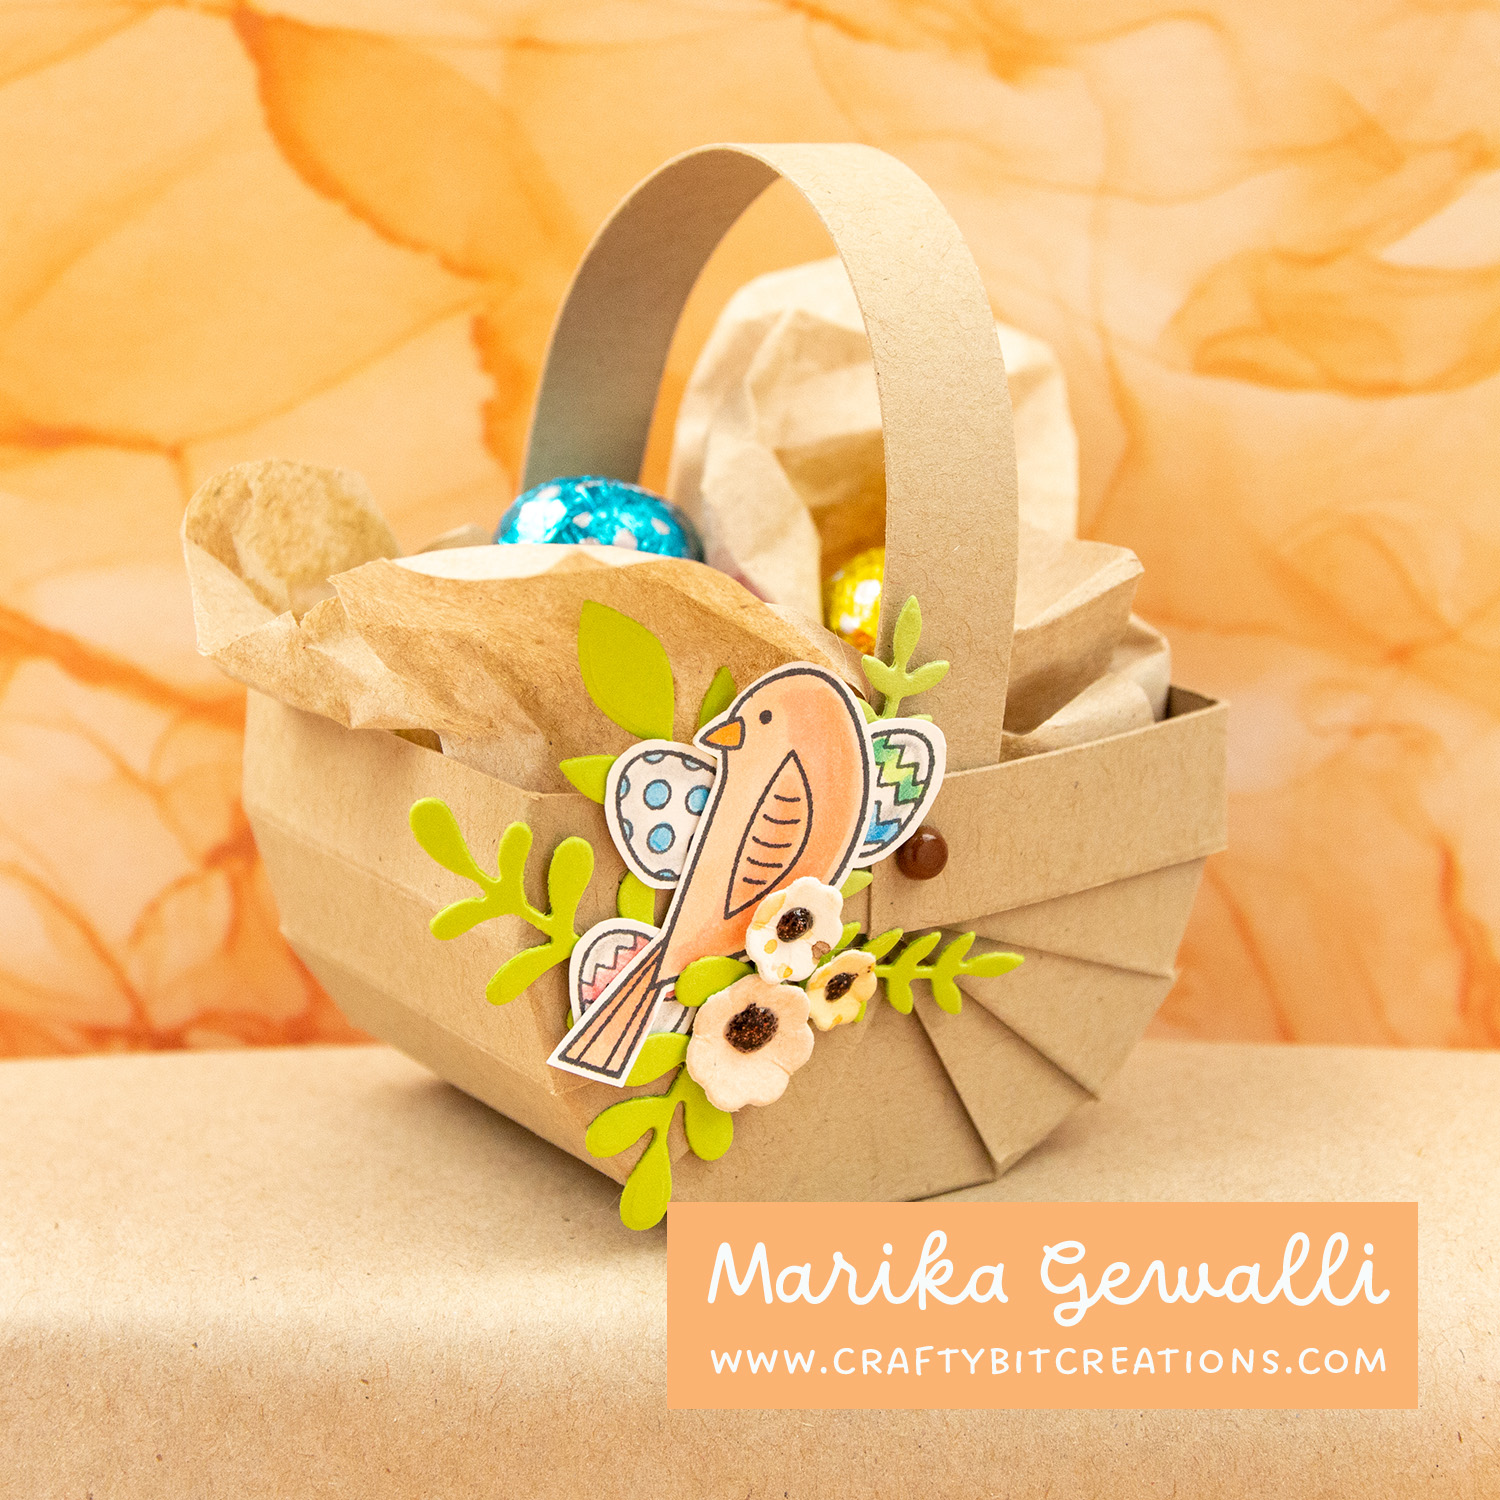 side view of kraft easter basket decorated with branches, some copic colored stamped eggs, a stamped and copic colored bird and some diecut flowers. Filled with Lindt chocolate eggs